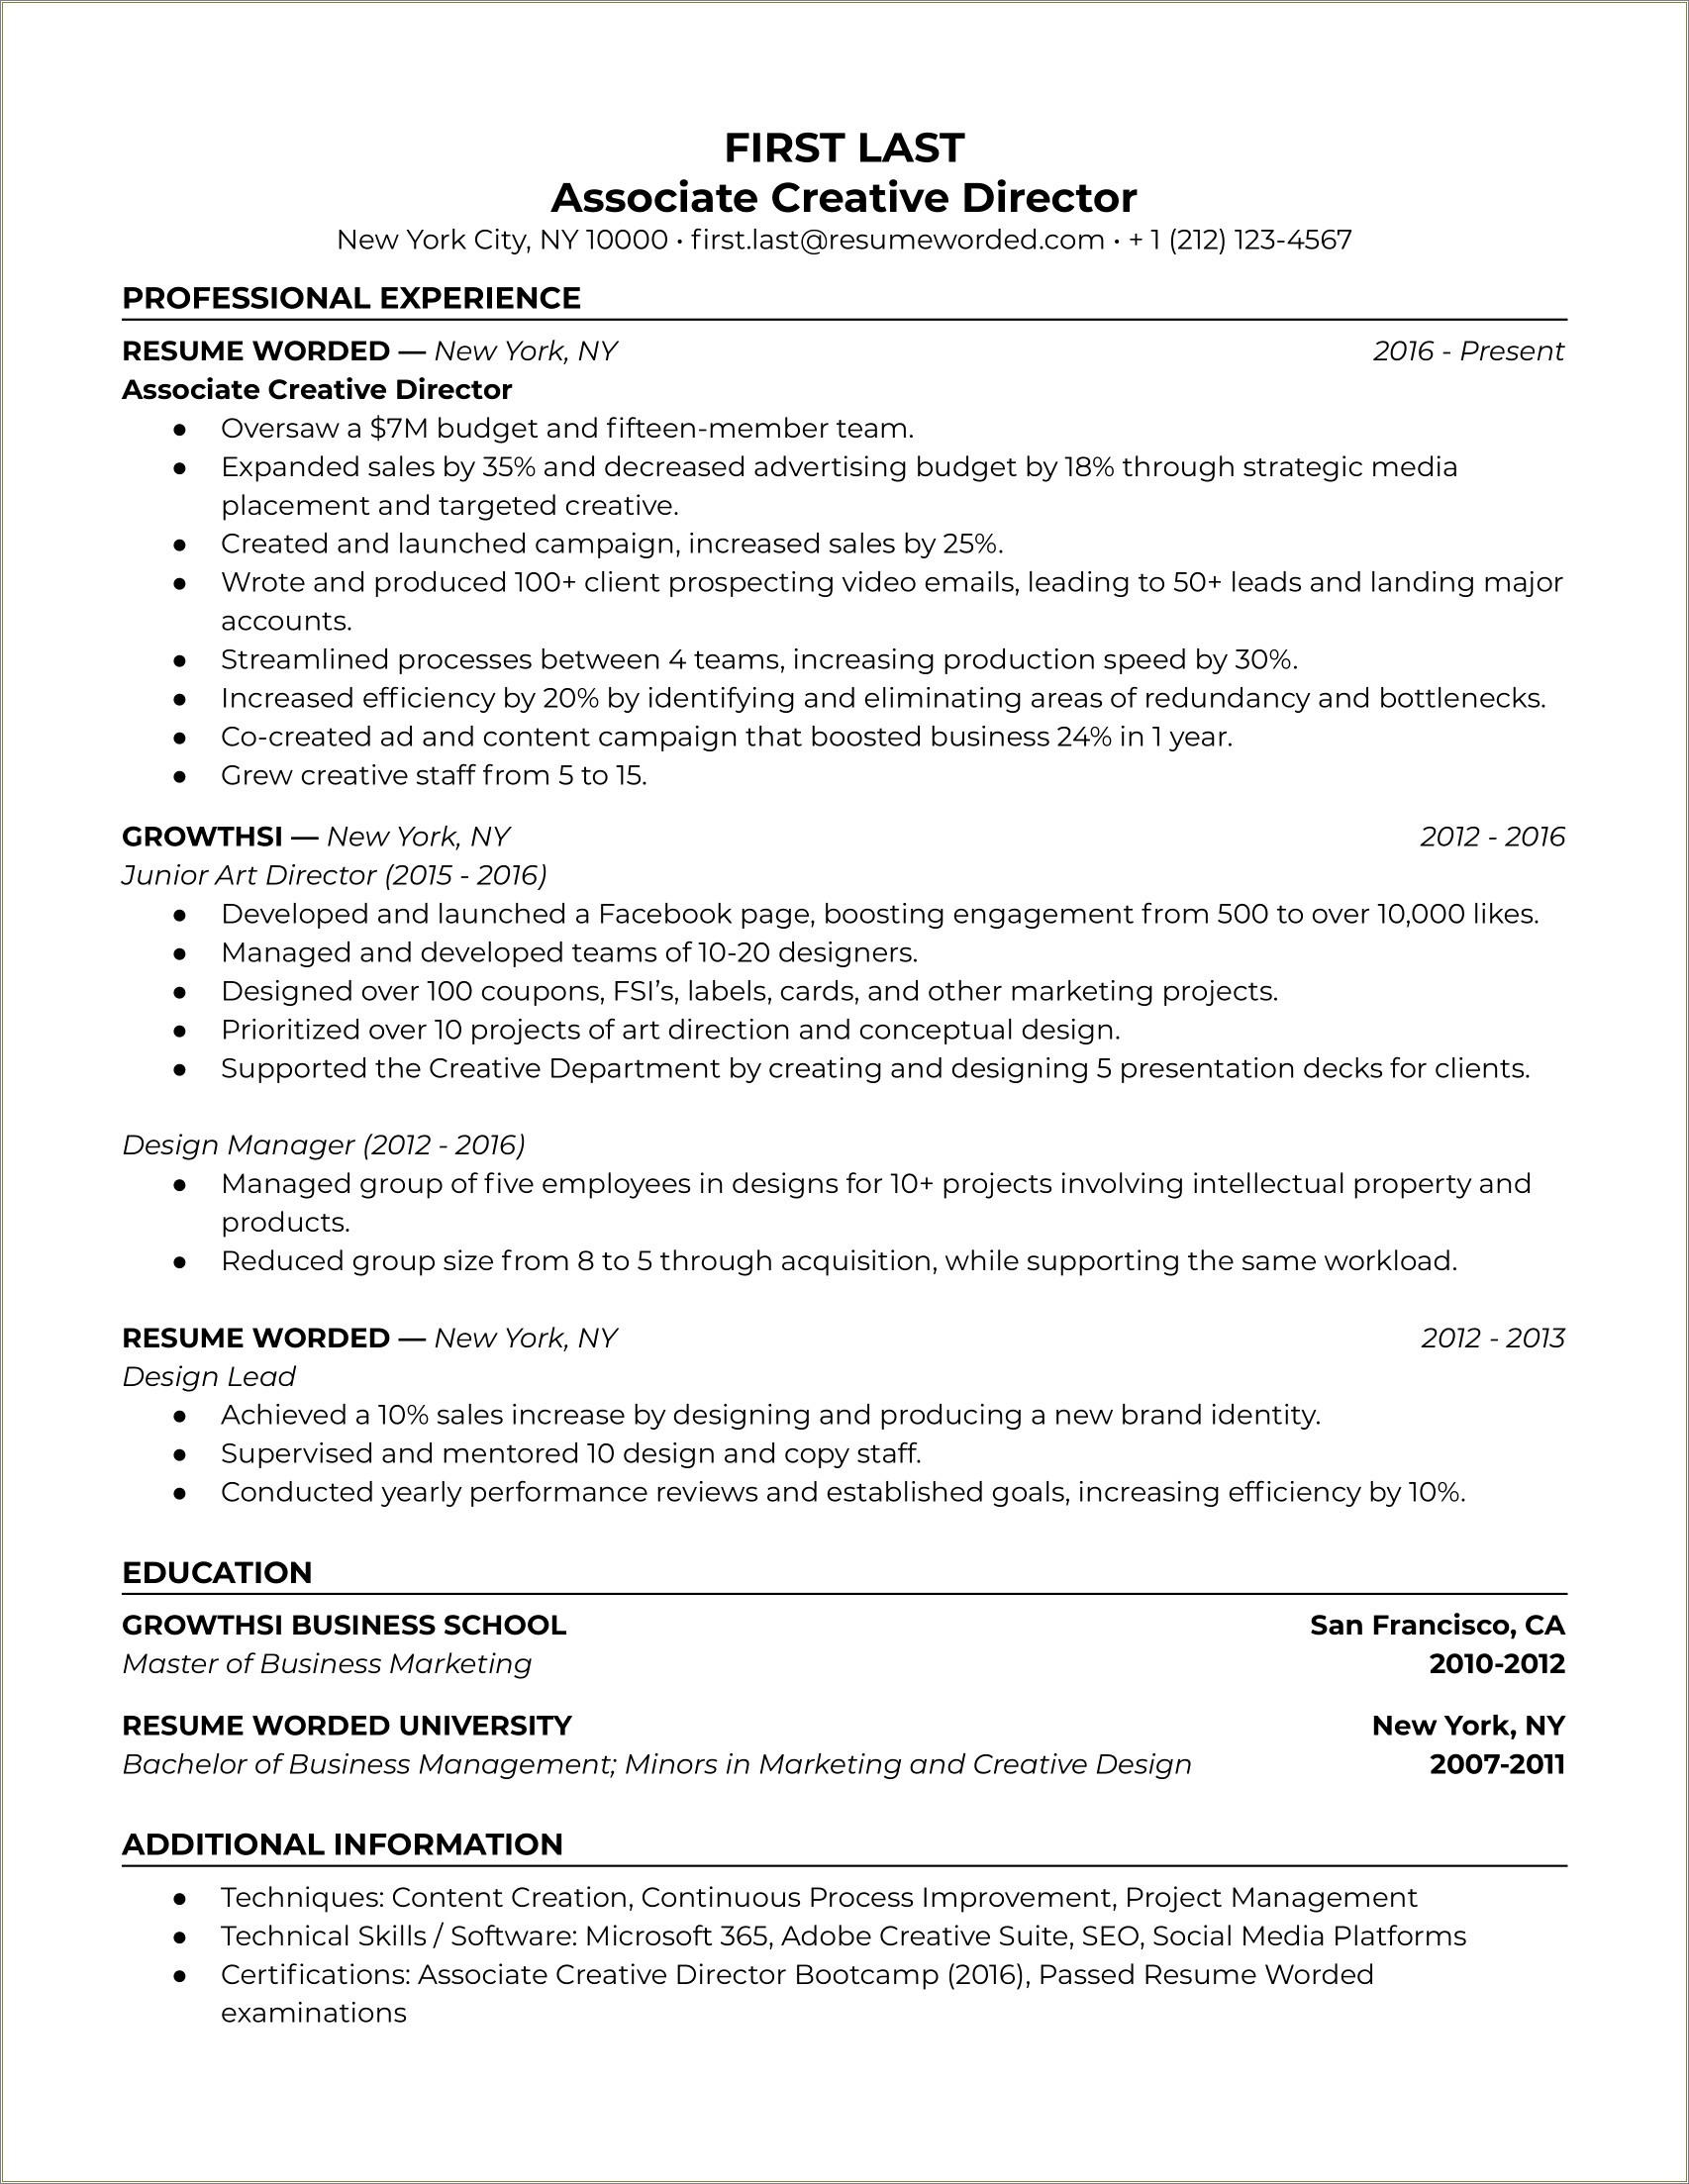 Idd Program Manager With Administrative Experience Resume